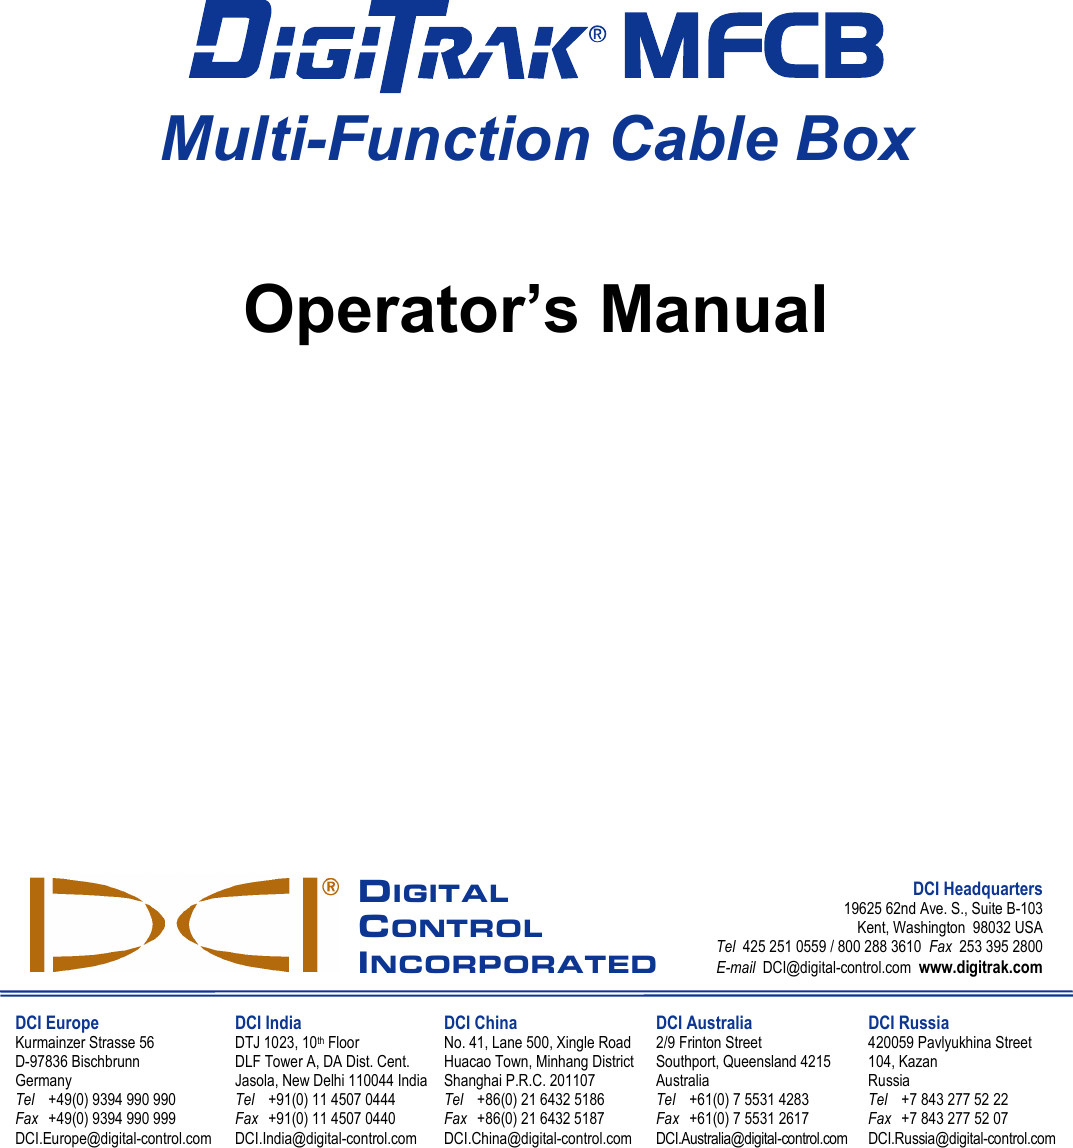                                         MFCB Multi-Function Cable Box    Operator’s Manual                       DIGITAL CONTROL INCORPORATED DCI Headquarters 19625 62nd Ave. S., Suite B-103 Kent, Washington  98032 USA Tel  425 251 0559 / 800 288 3610  Fax  253 395 2800 E-mail  DCI@digital-control.com  www.digitrak.com  DCI Europe Kurmainzer Strasse 56 D-97836 Bischbrunn  Germany Tel +49(0) 9394 990 990 Fax +49(0) 9394 990 999 DCI.Europe@digital-control.com DCI India DTJ 1023, 10th Floor DLF Tower A, DA Dist. Cent. Jasola, New Delhi 110044 India Tel +91(0) 11 4507 0444 Fax +91(0) 11 4507 0440 DCI.India@digital-control.com DCI China No. 41, Lane 500, Xingle Road Huacao Town, Minhang District Shanghai P.R.C. 201107  Tel +86(0) 21 6432 5186 Fax +86(0) 21 6432 5187 DCI.China@digital-control.com DCI Australia 2/9 Frinton Street Southport, Queensland 4215 Australia Tel +61(0) 7 5531 4283 Fax +61(0) 7 5531 2617 DCI.Australia@digital-control.com DCI Russia 420059 Pavlyukhina Street  104, Kazan Russia Tel +7 843 277 52 22 Fax +7 843 277 52 07 DCI.Russia@digital-control.com     